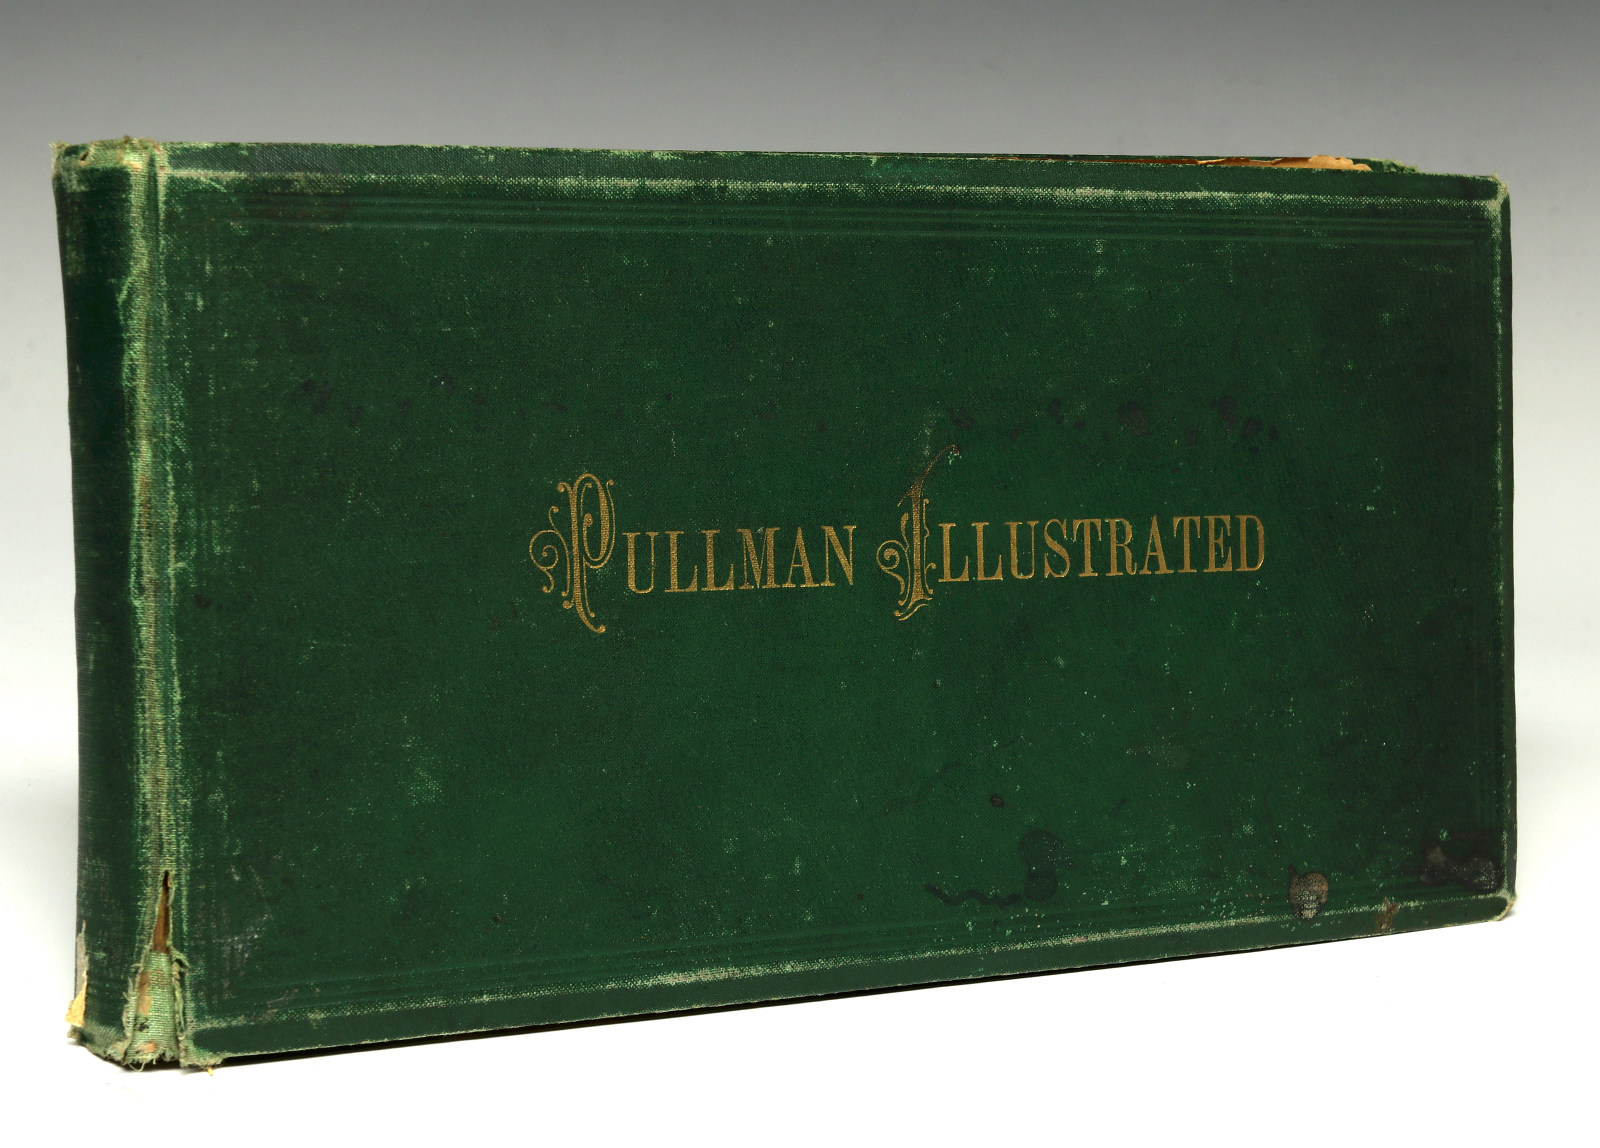 AN 1883 BOUND PHOTO BOOK 'PULLMAN ILLUSTRATED'